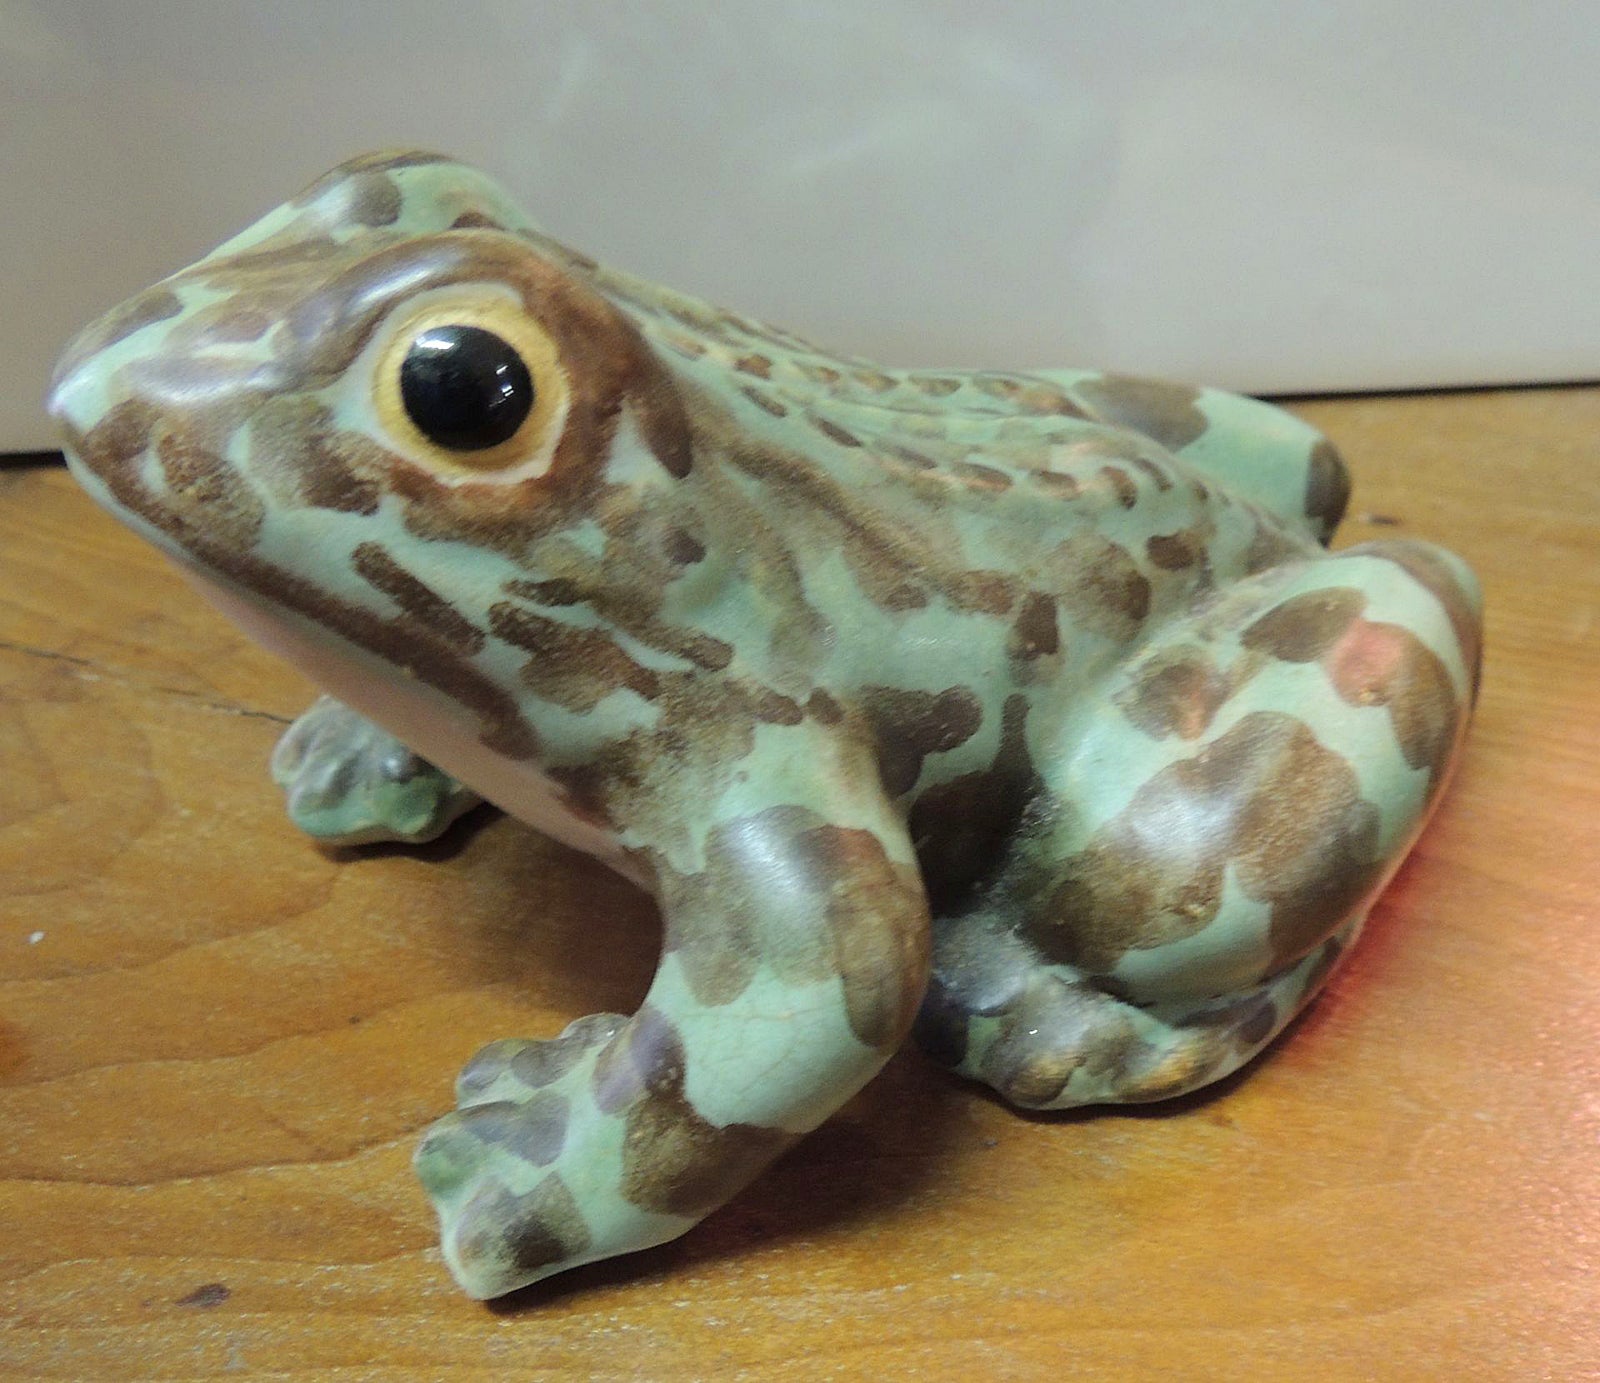 Grandmother's Weller frog symbolizes luck when it comes to value